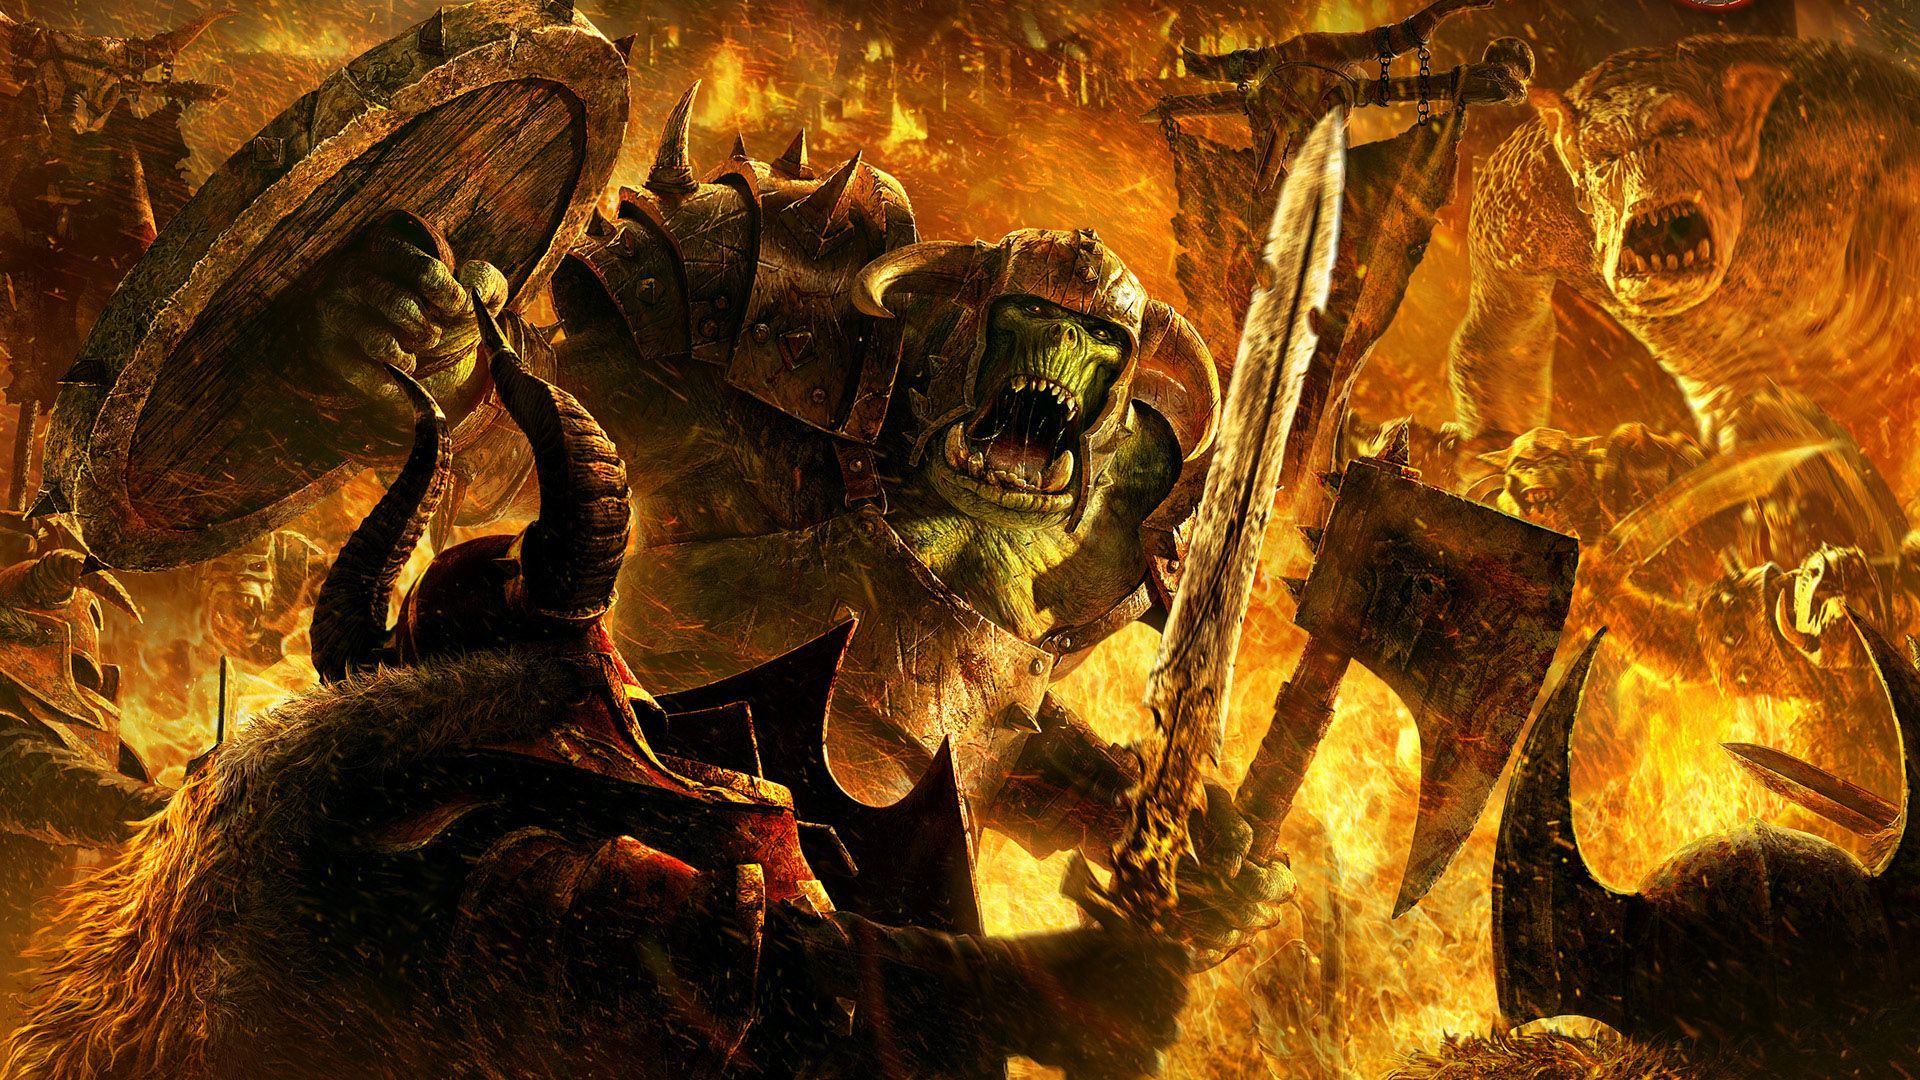 Orc Warrior wallpapers and images - wallpapers, pictures, photos